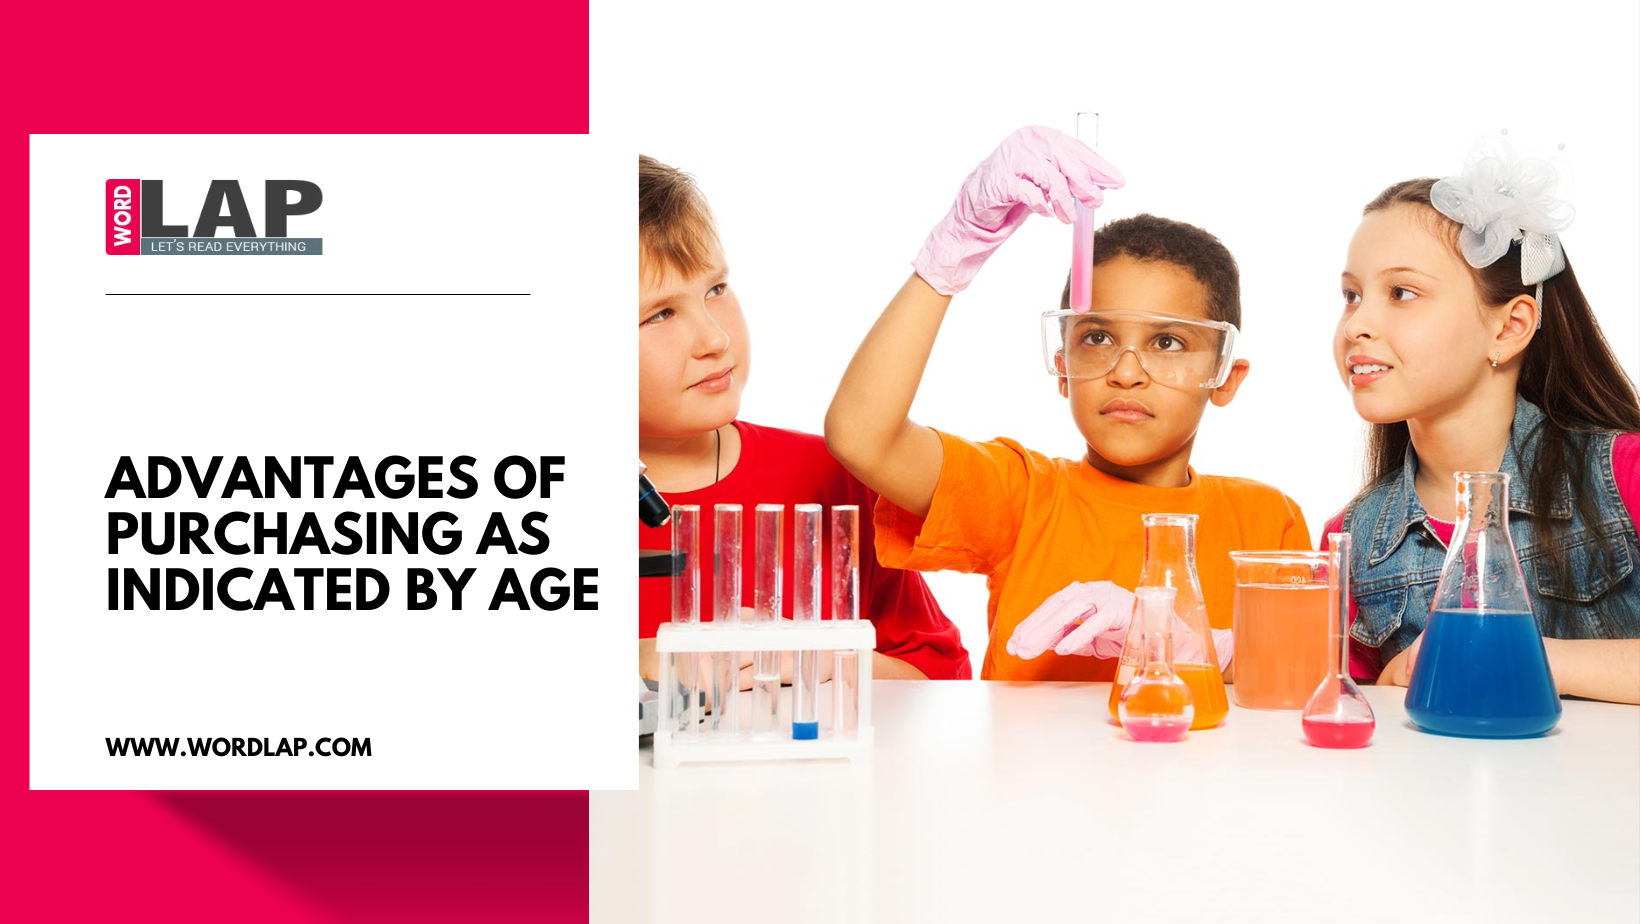 Steps to Find The Best Science Experiments Kits For Kids